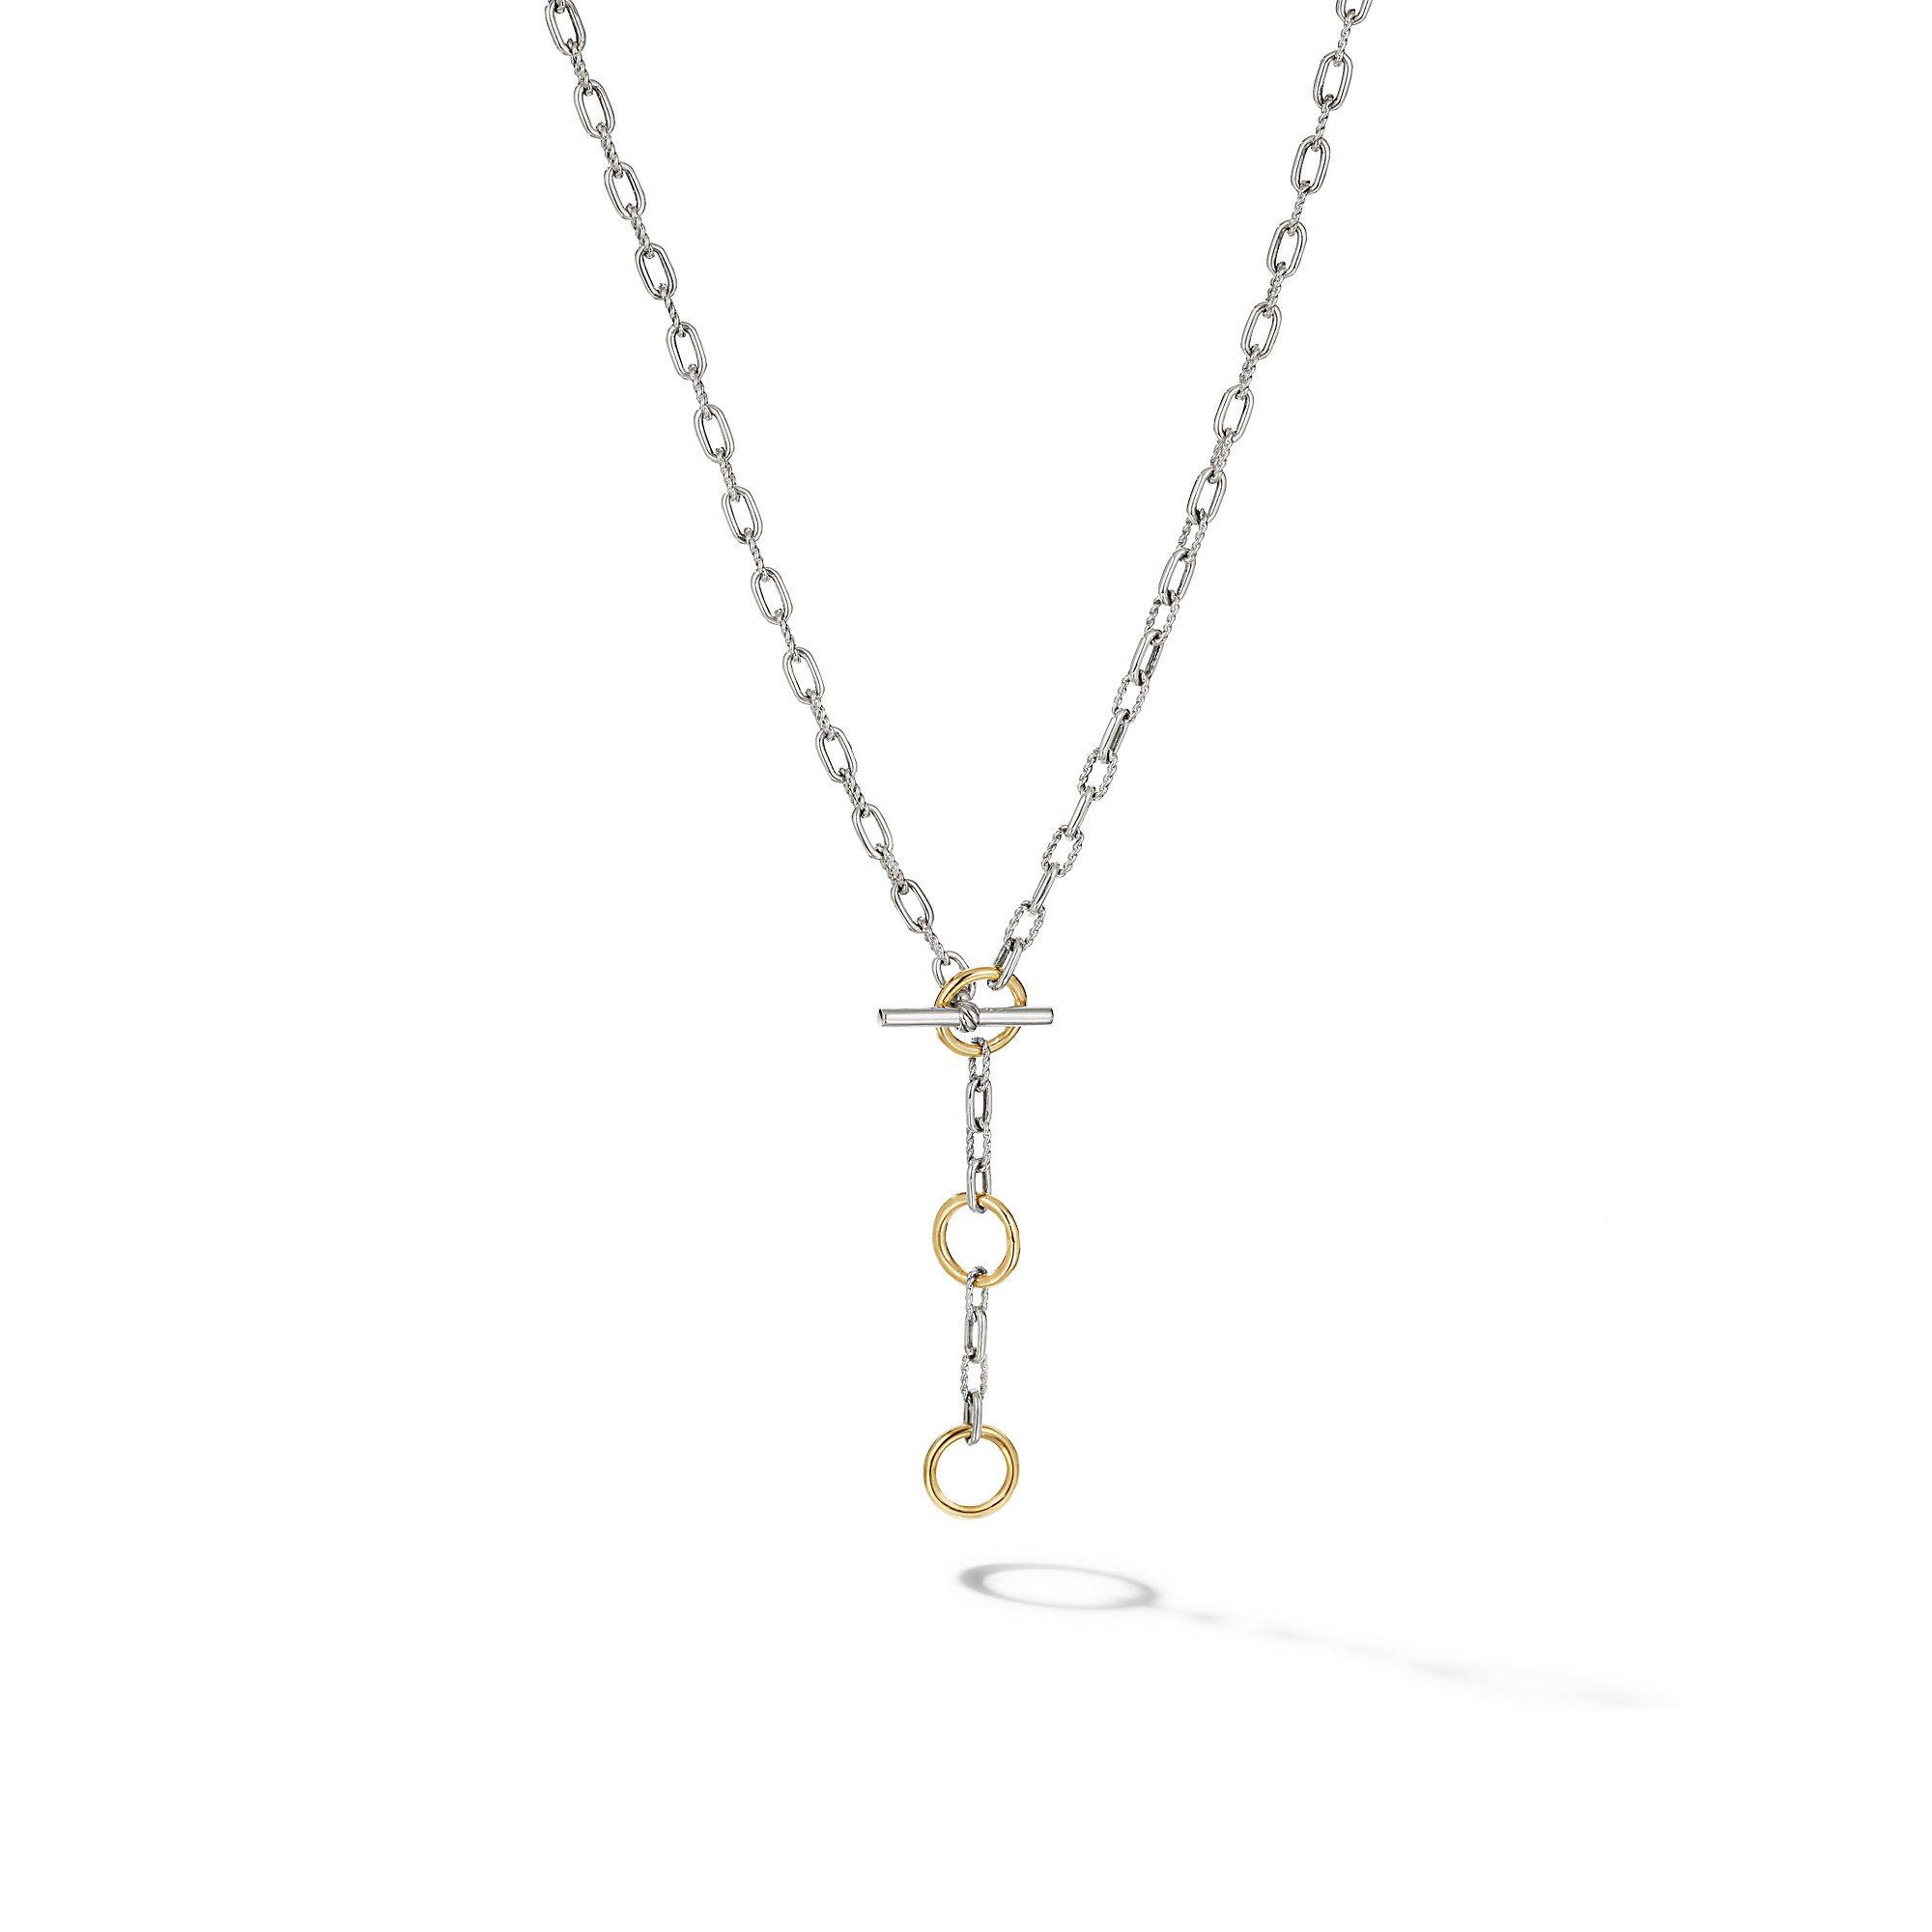 David Yurman DY Madison Three Ring Chain Necklace with 18k Yellow Gold